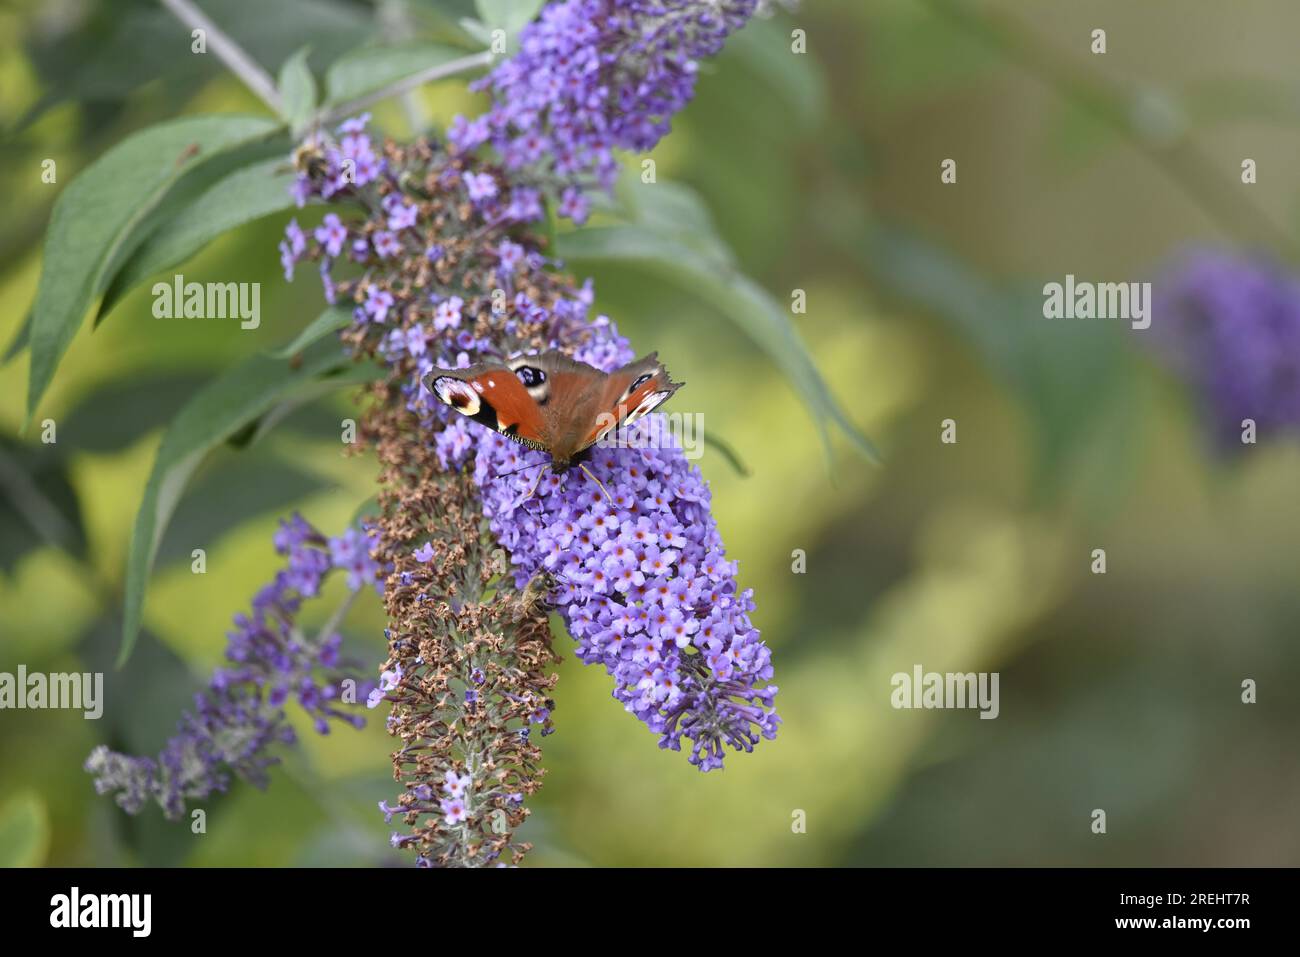 Centre Foreground Image of a Peacock Butterfly (Inachis io) Facing Camera from a Purple Buddleia Plant, Wings Open with Proboscis in Flower, UK Stock Photo